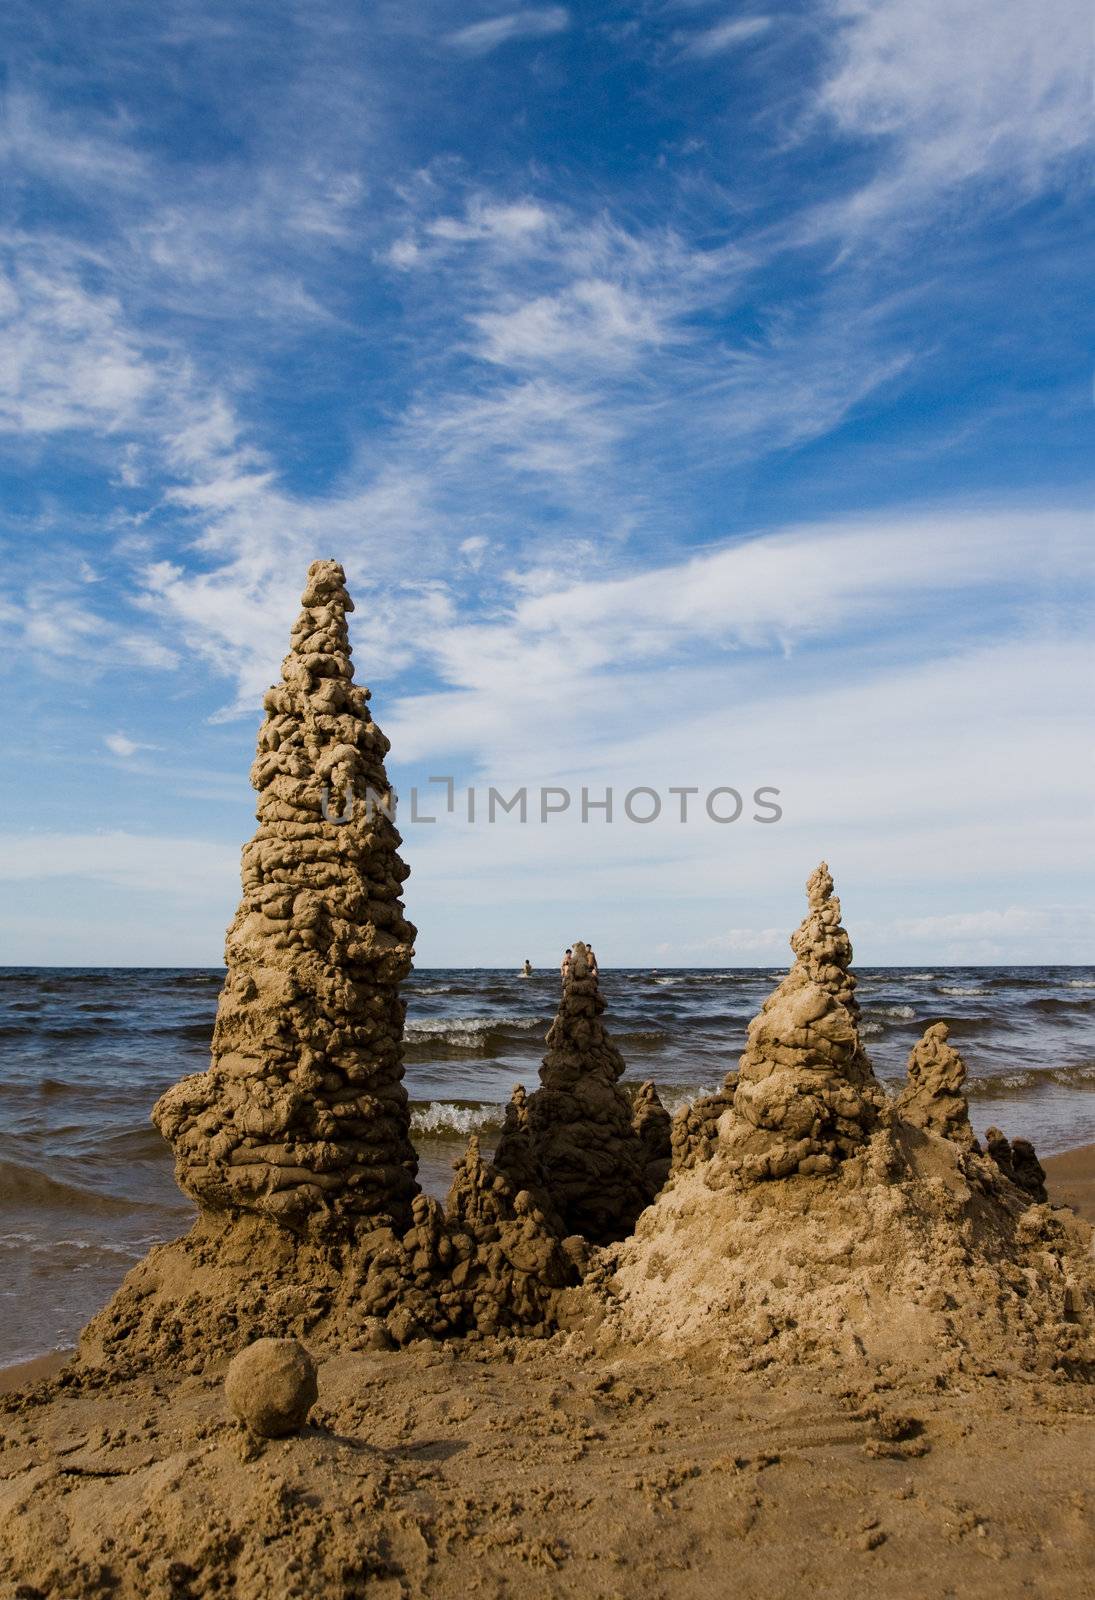 Sand castle at the beach by ints